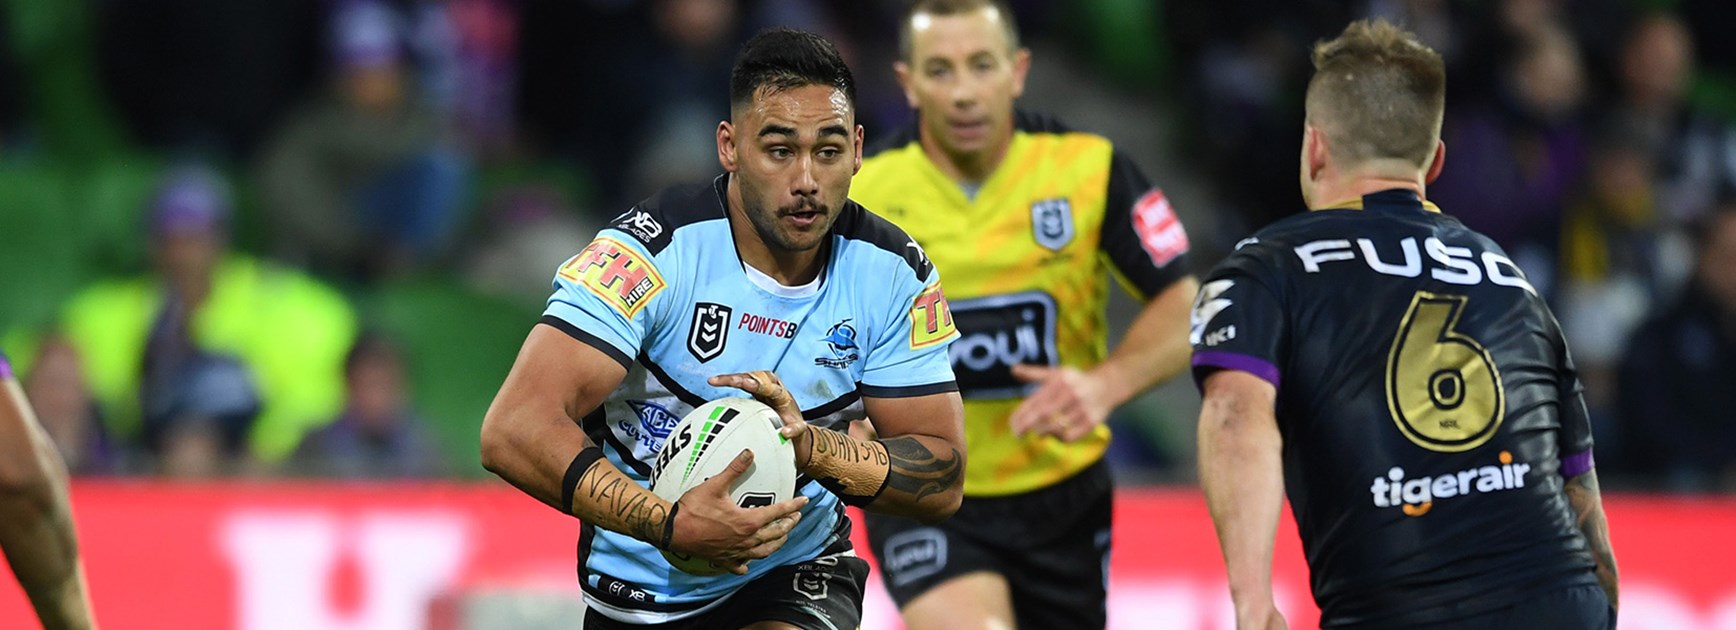 Storm celebrate with win over Sharks